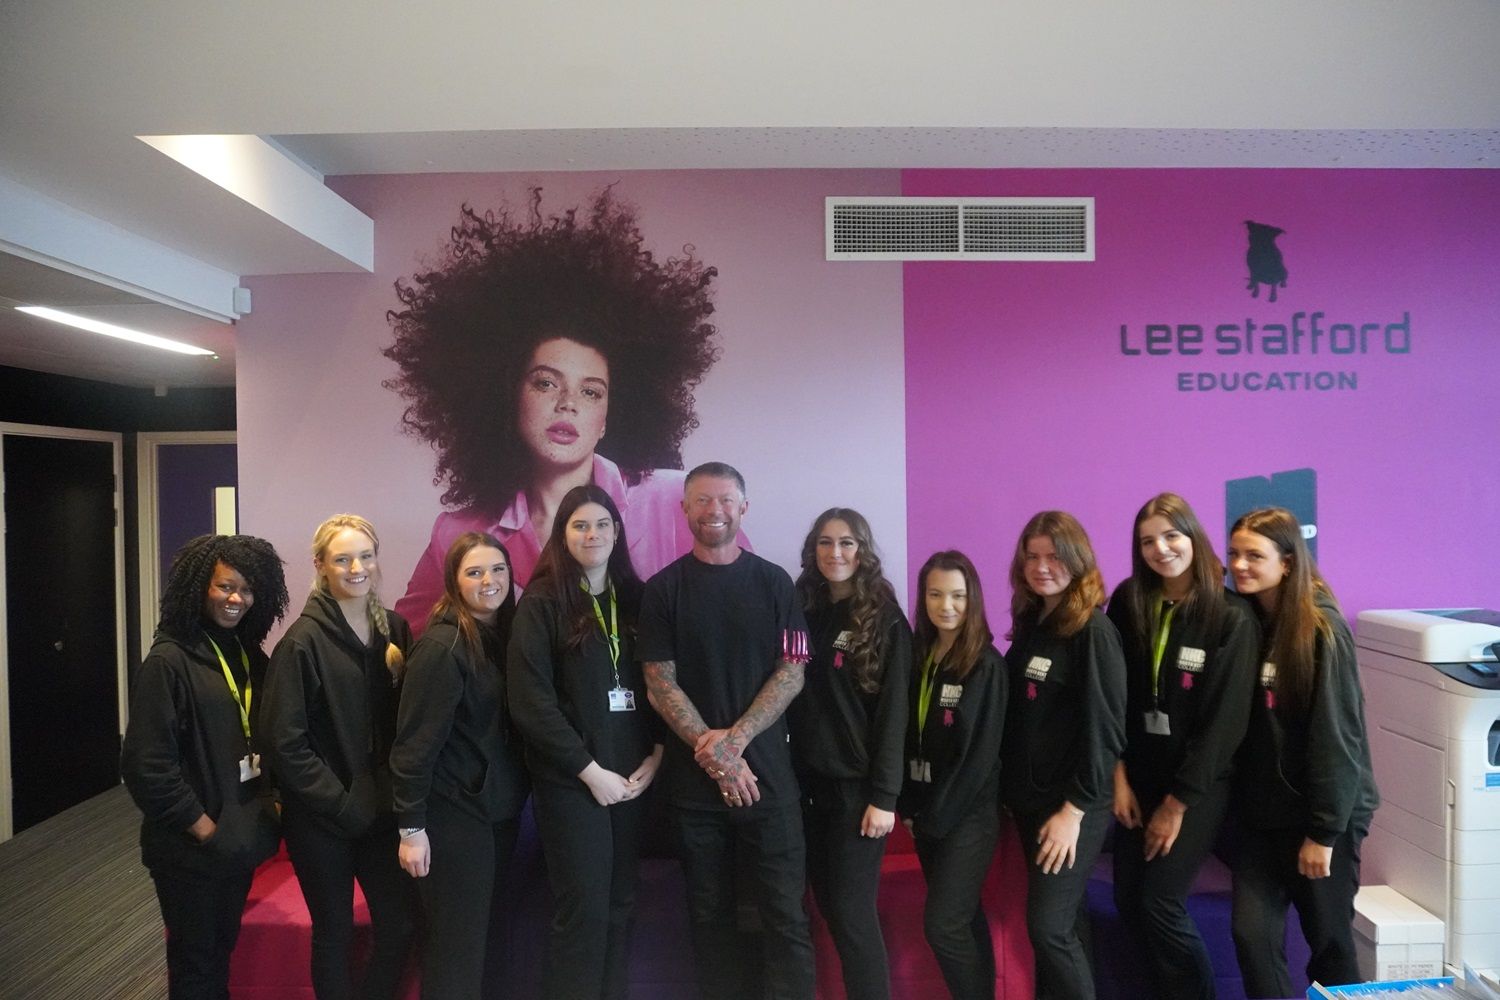 Hairdresser Lee Stafford with staff and students